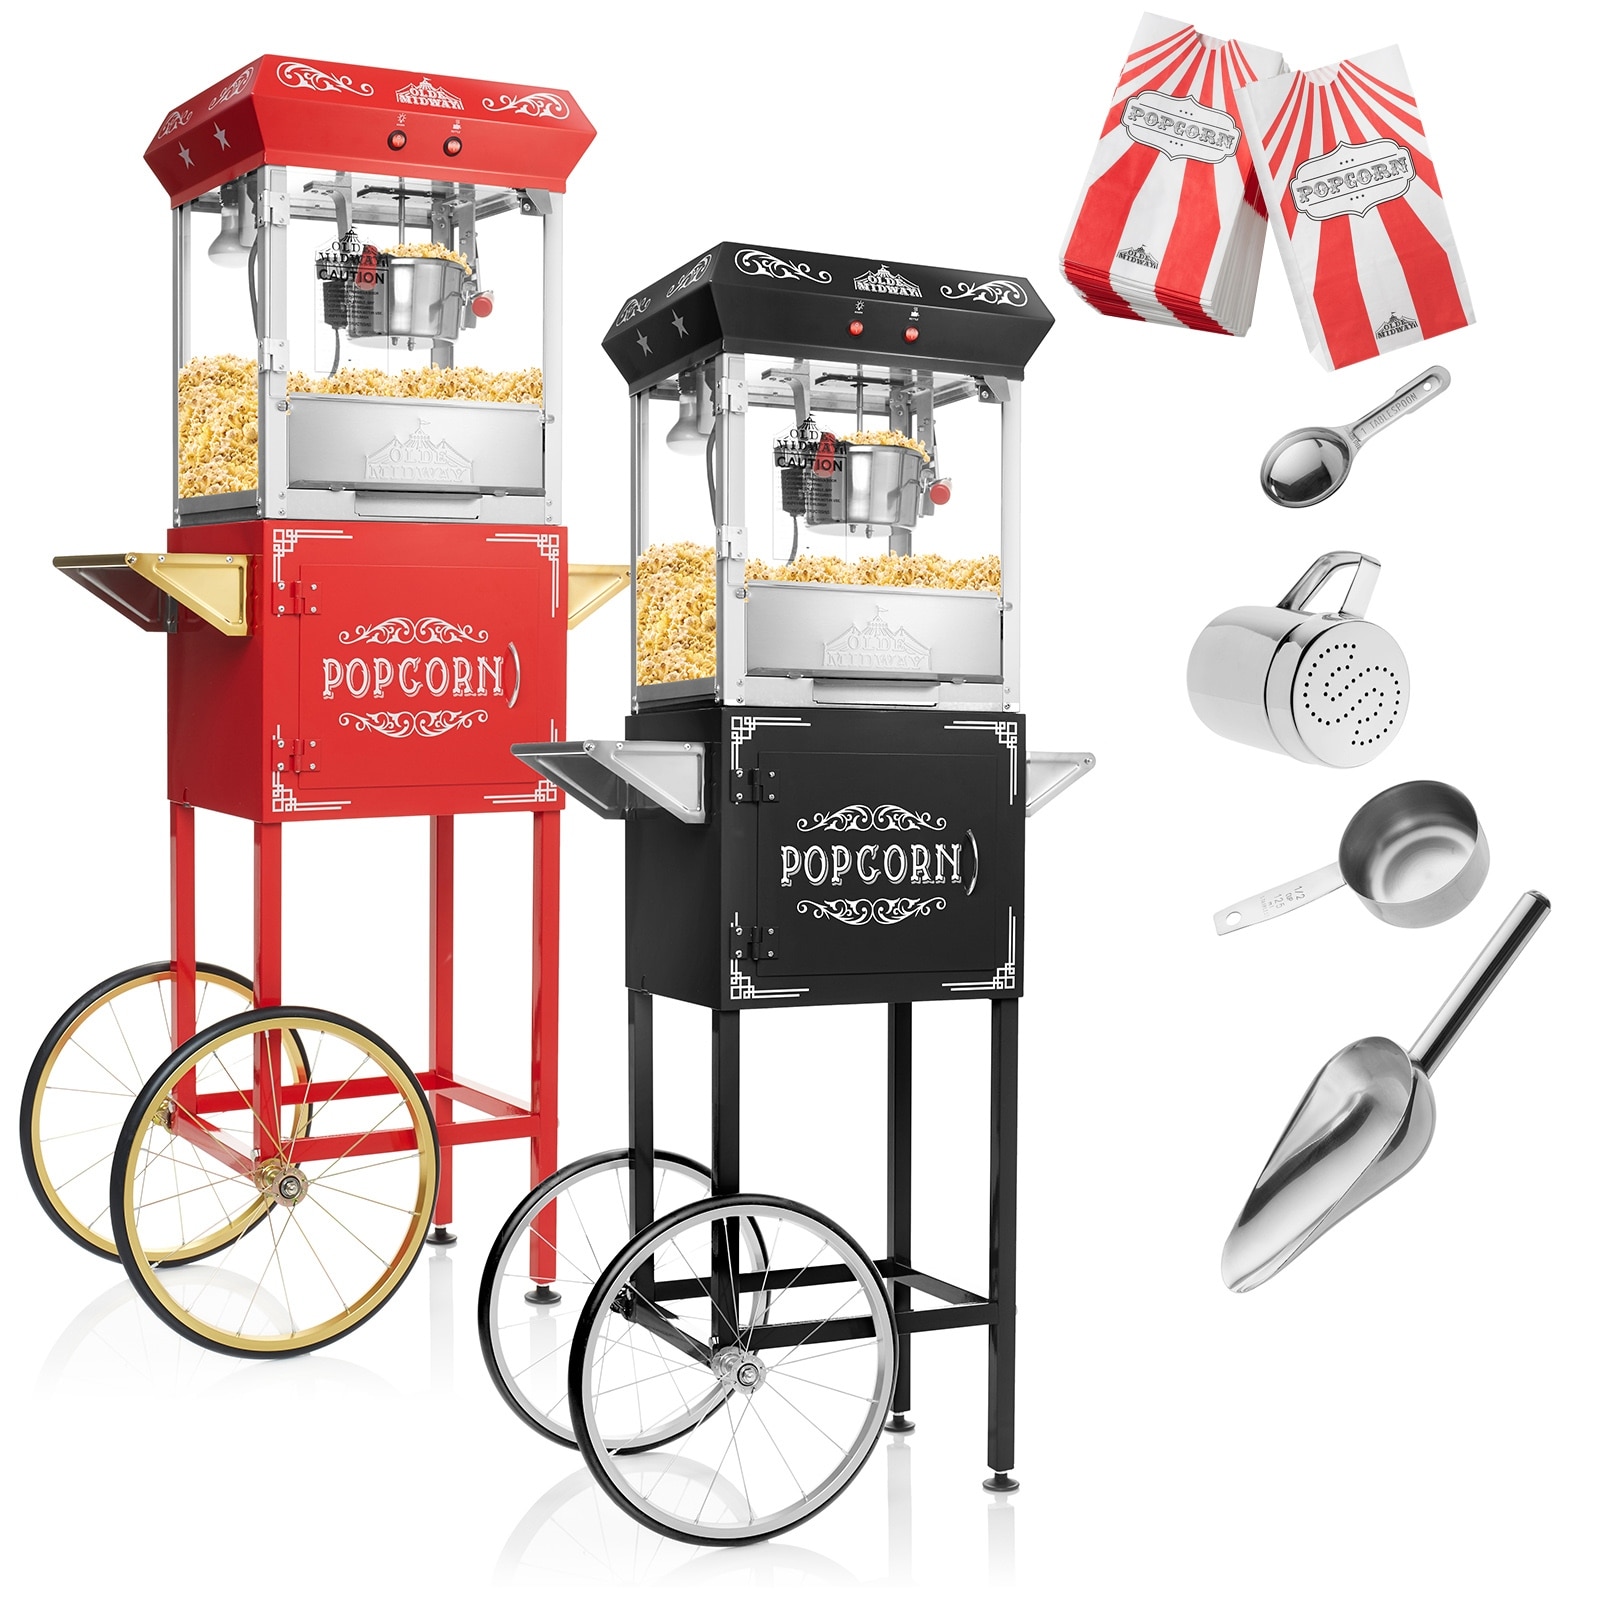 https://ak1.ostkcdn.com/images/products/is/images/direct/4b44a1b3f768c436a3df00897a8d04d14b27ddc1/Vintage-Style-Popcorn-Machine-Popper-with-Cart-and-4-Ounce-Kettle.jpg